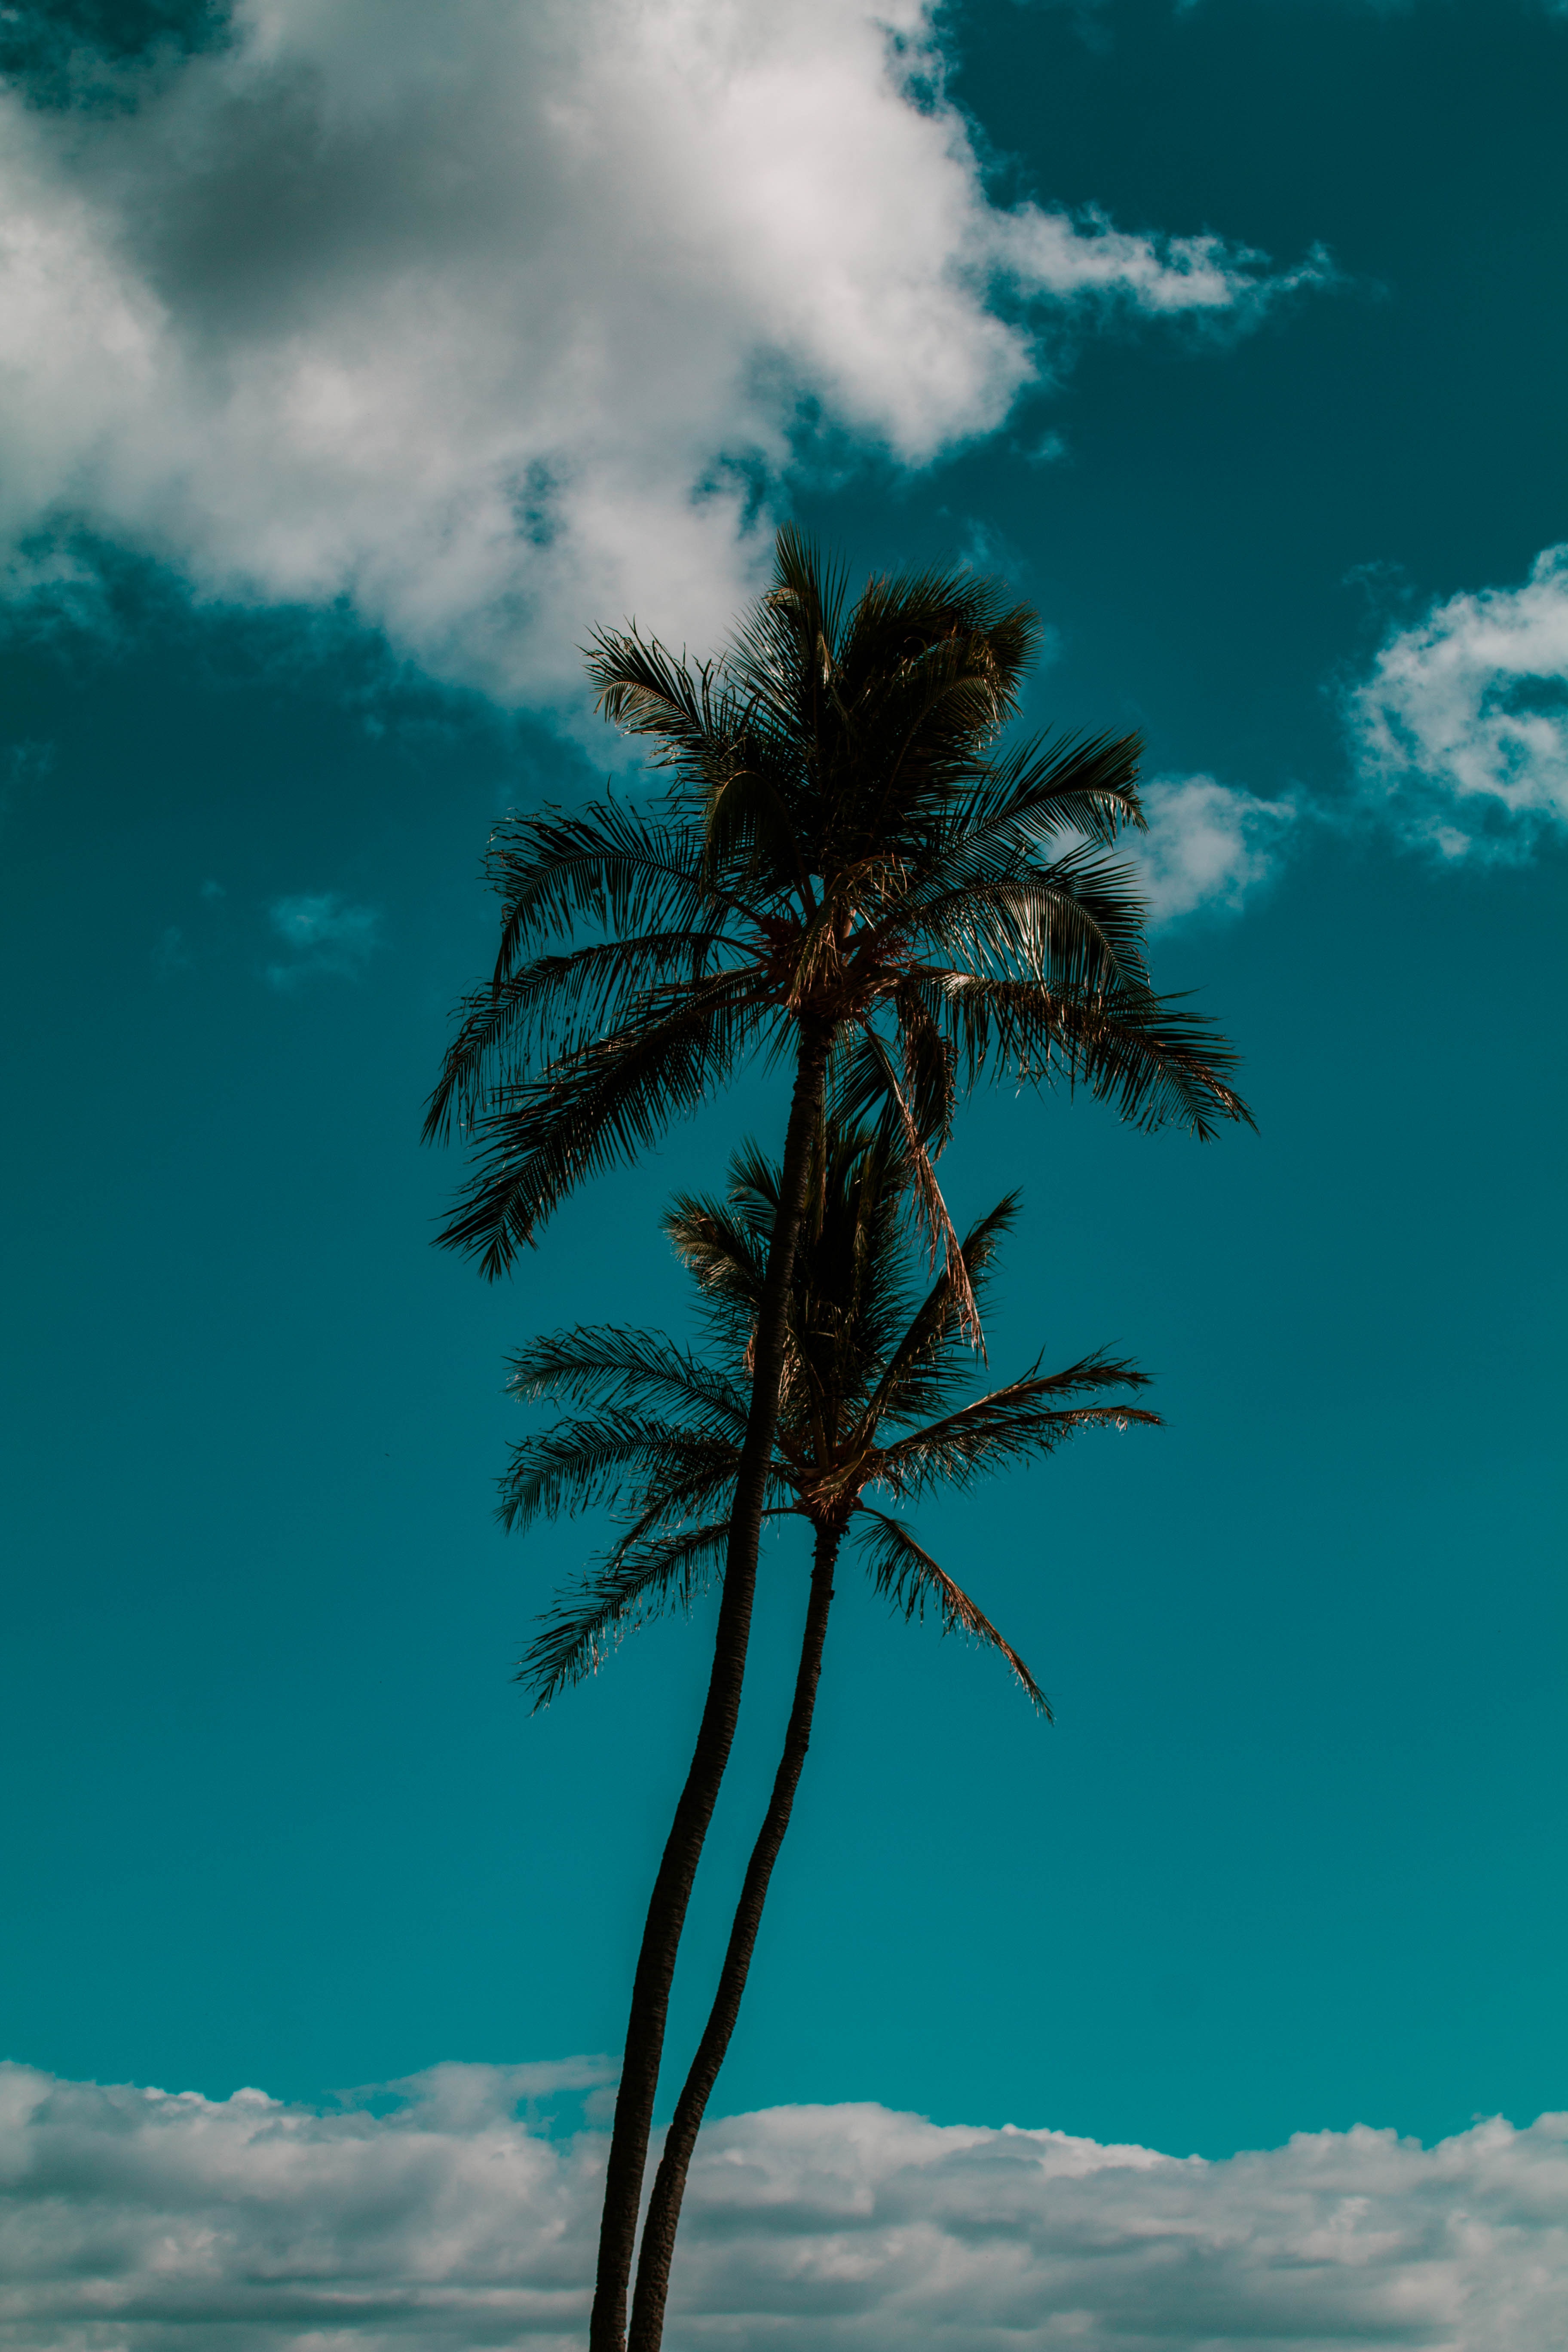 android trees, nature, sky, clouds, palm, tropics